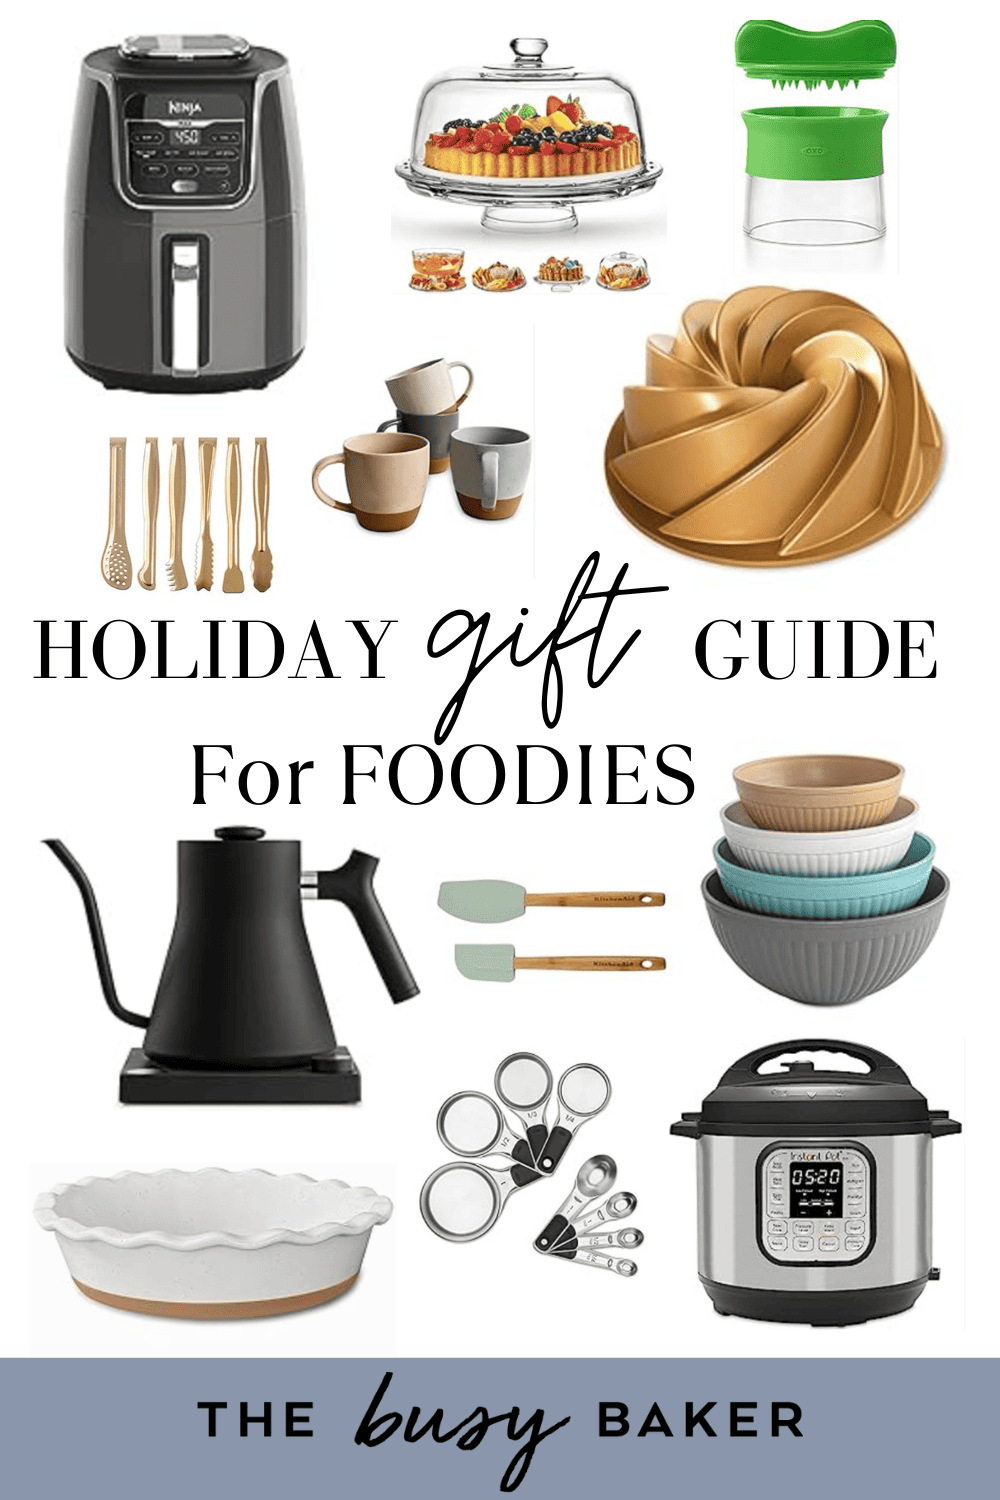 Gifts For the Busy Home Cook